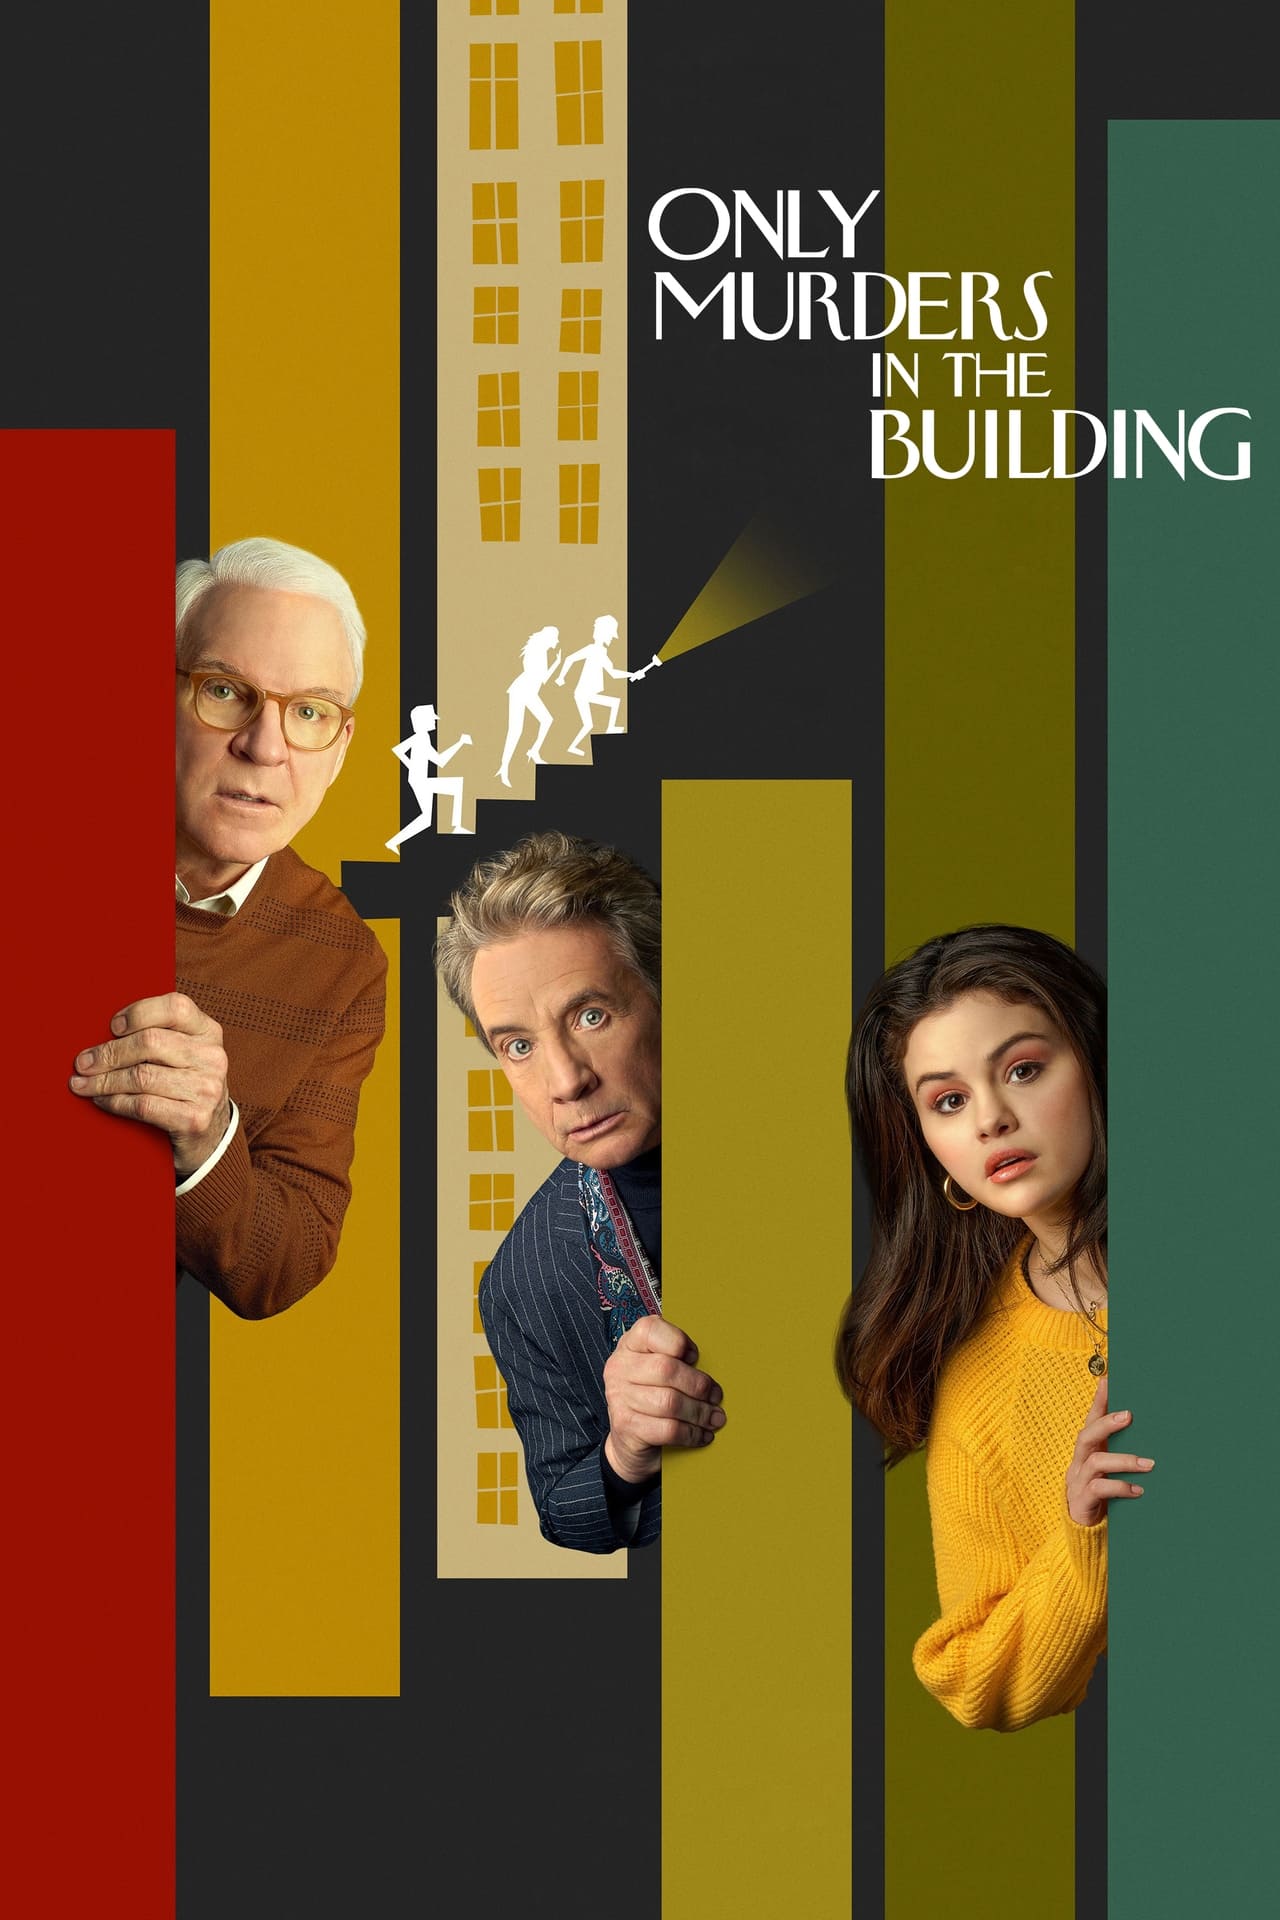 Only Murders in the Building (season 1)